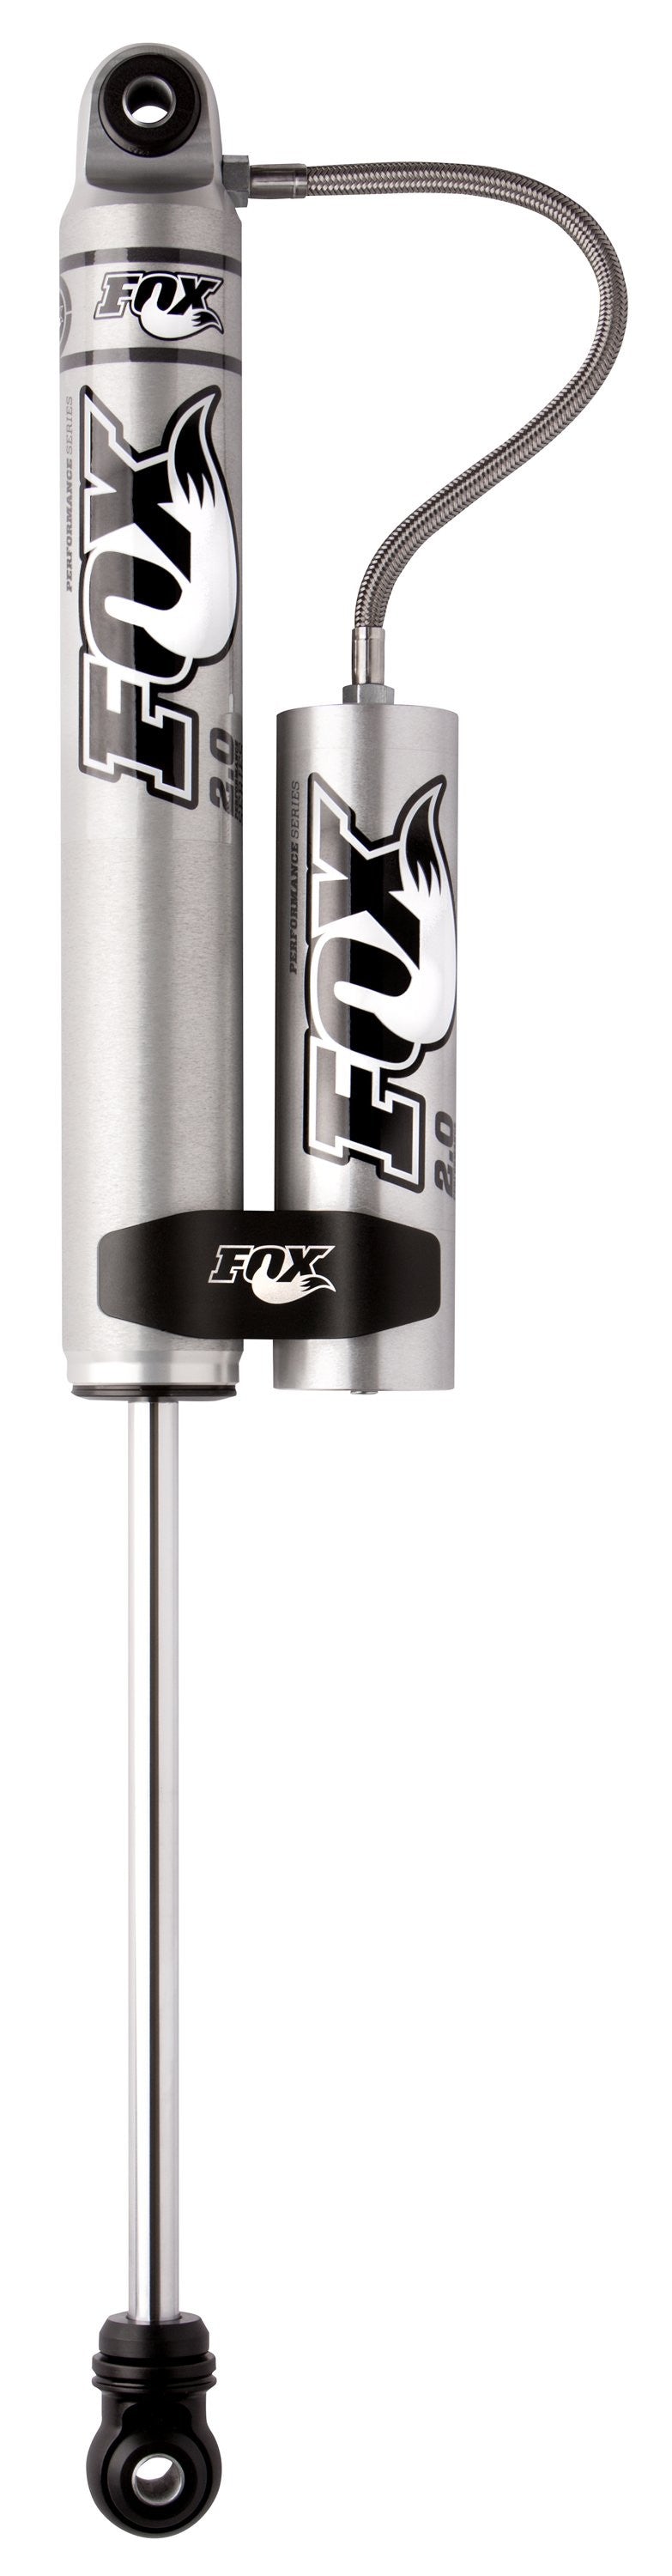 PERFORMANCE SERIES 2.0 SMOOTH BODY RESERVOIR SHOCK Lift: 4.5-5.5 2005-2016 Ford F-450 Super Duty FOX-985-24-104 - 2.0 SHOCK - FOX Offroad Shocks - Texas Complete Truck Center